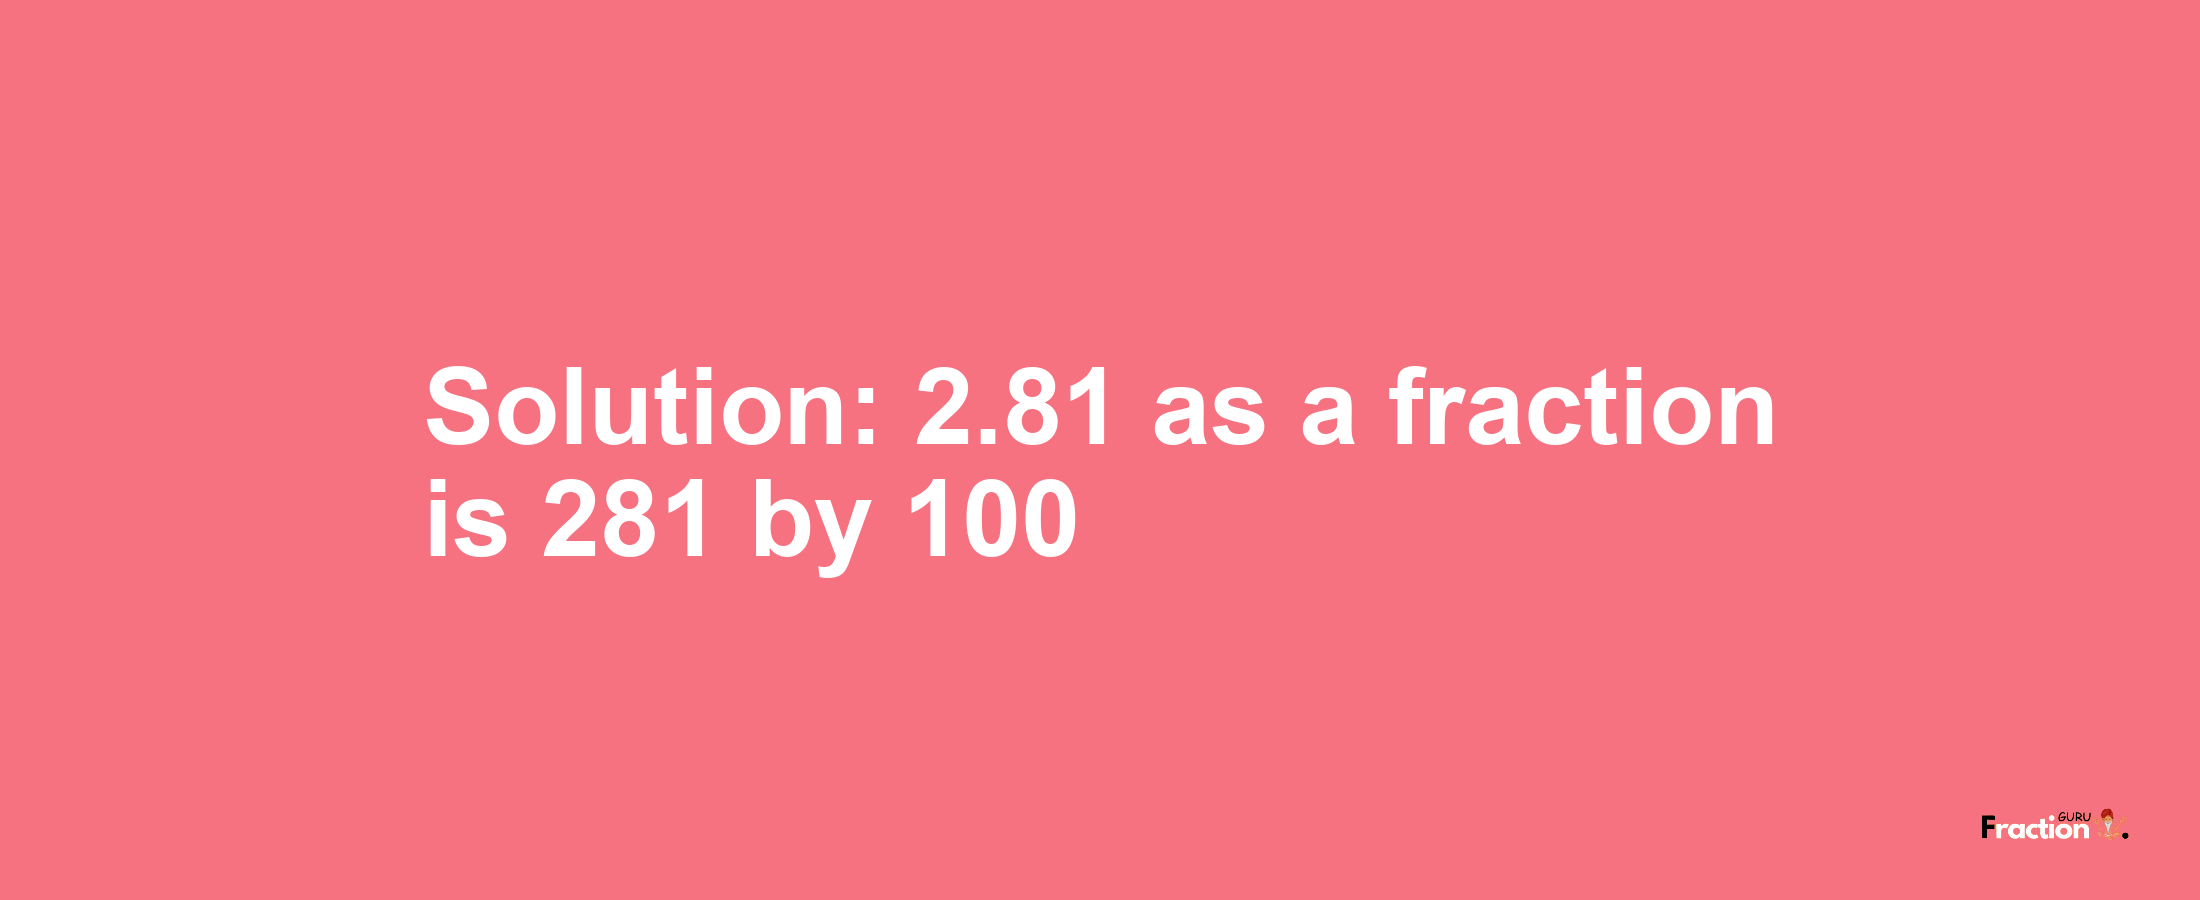 Solution:2.81 as a fraction is 281/100